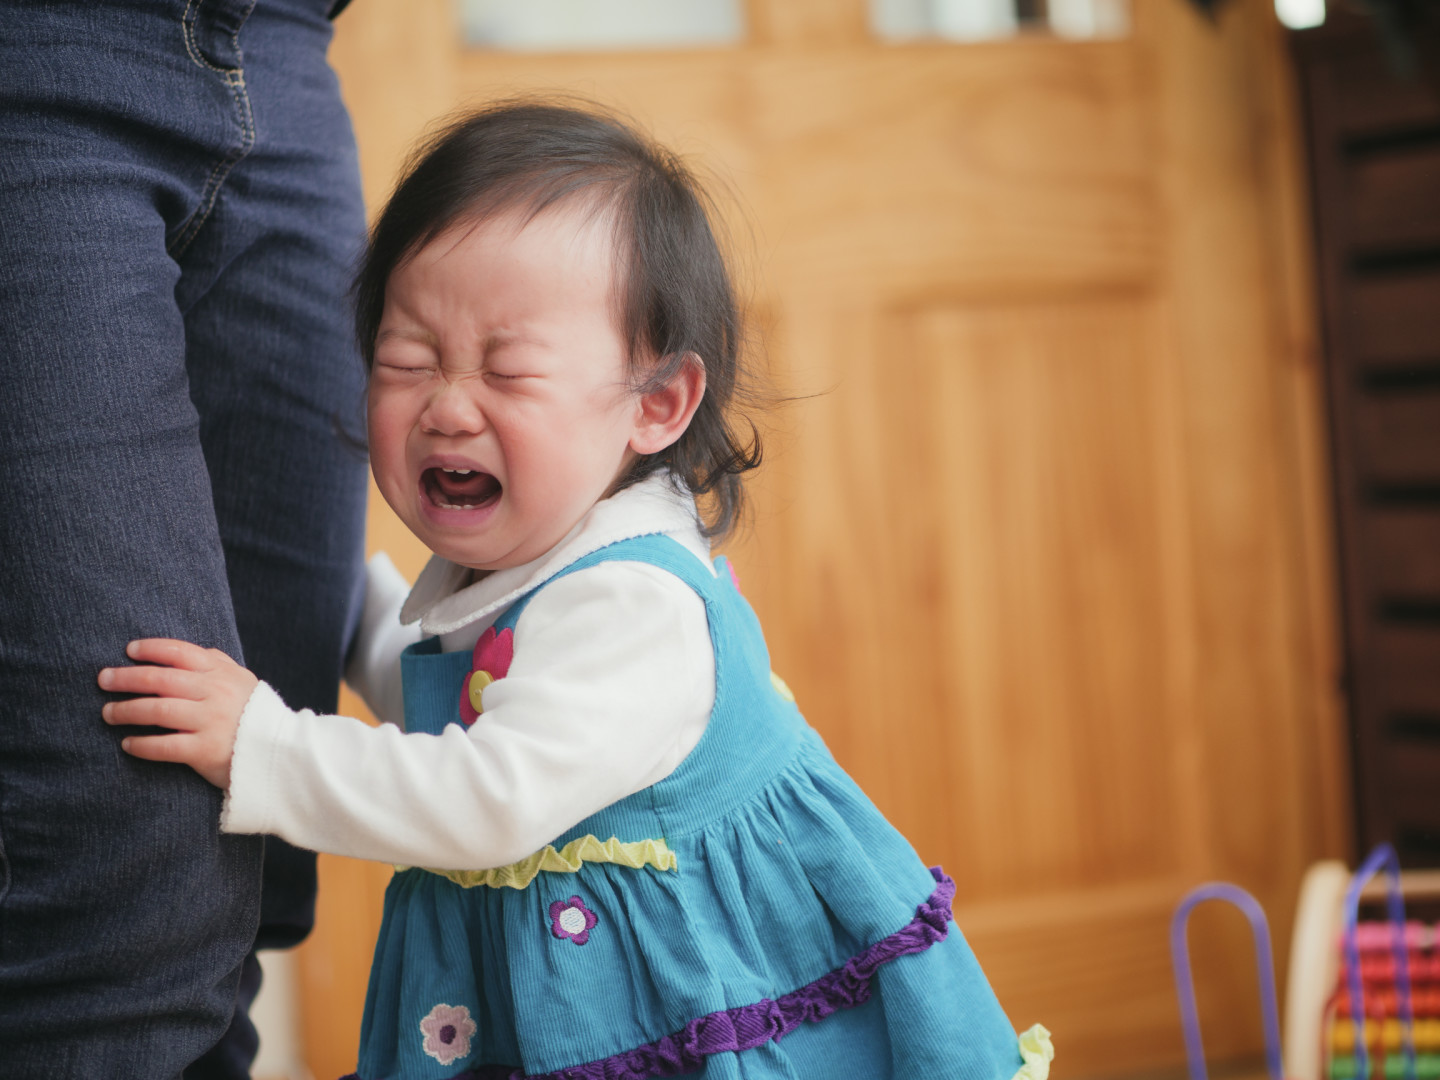 Separation anxiety in toddler: A fussing baby attached to mom at leg.